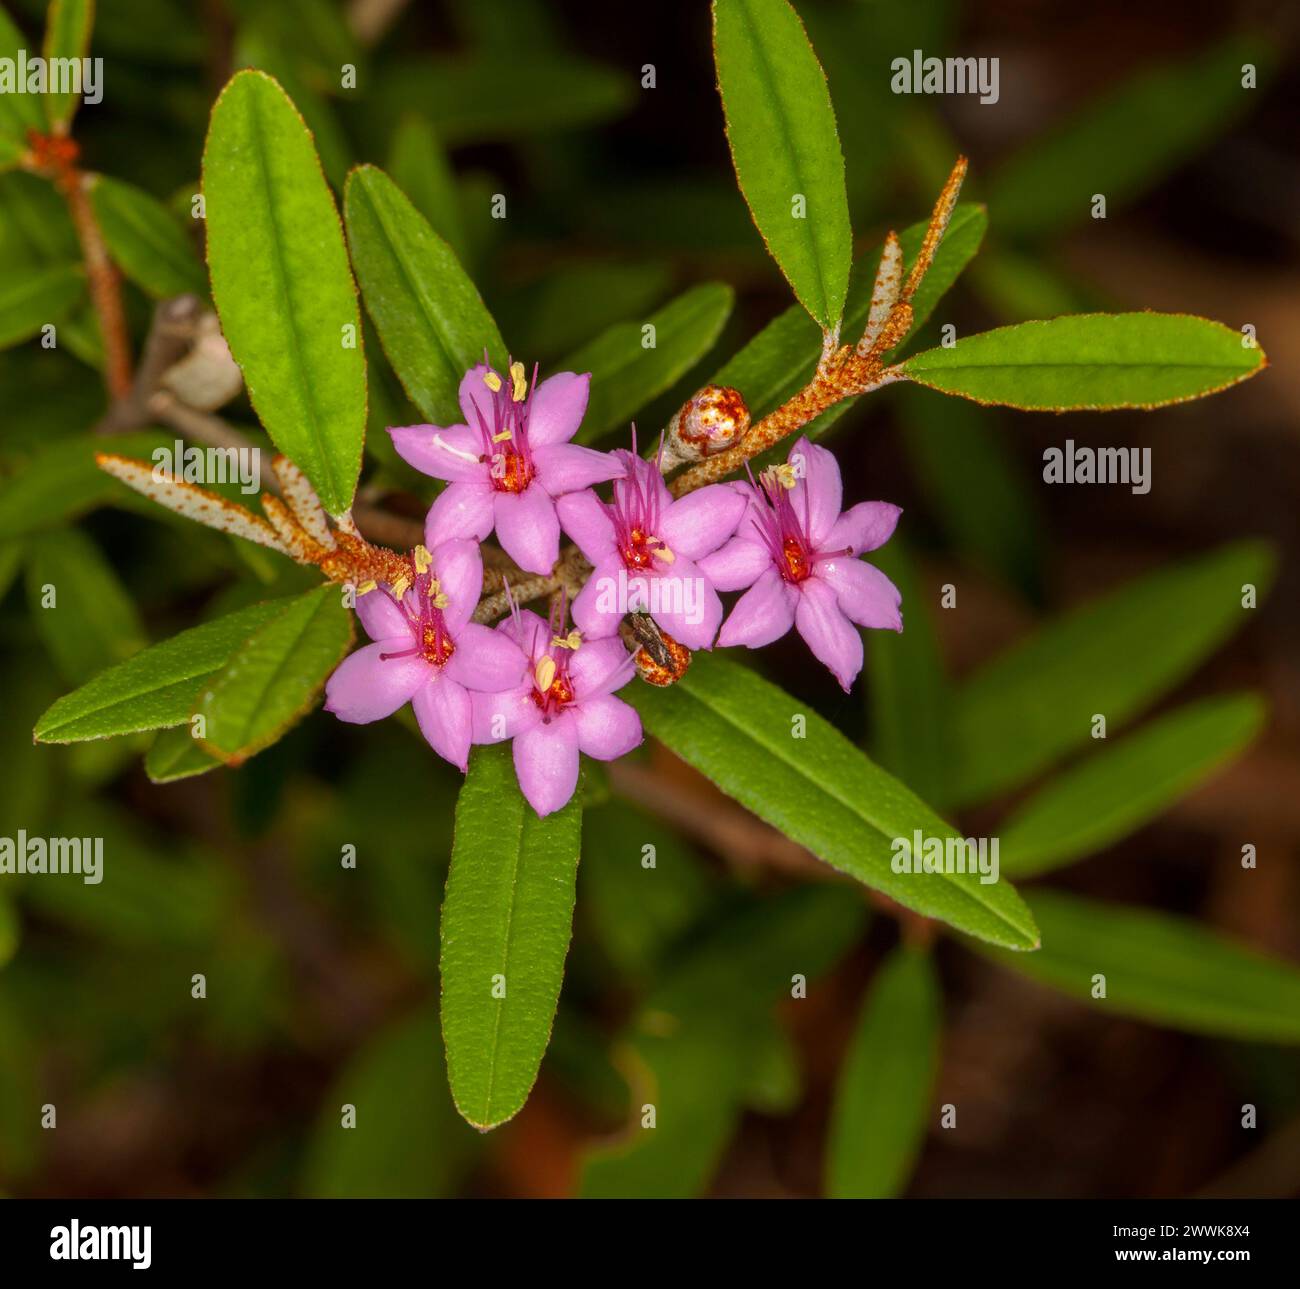 Cluster of bright pink flowers and green leaves Phebalium nottii 'Kay Bryant', Australian native shrub growing in a garden Stock Photo